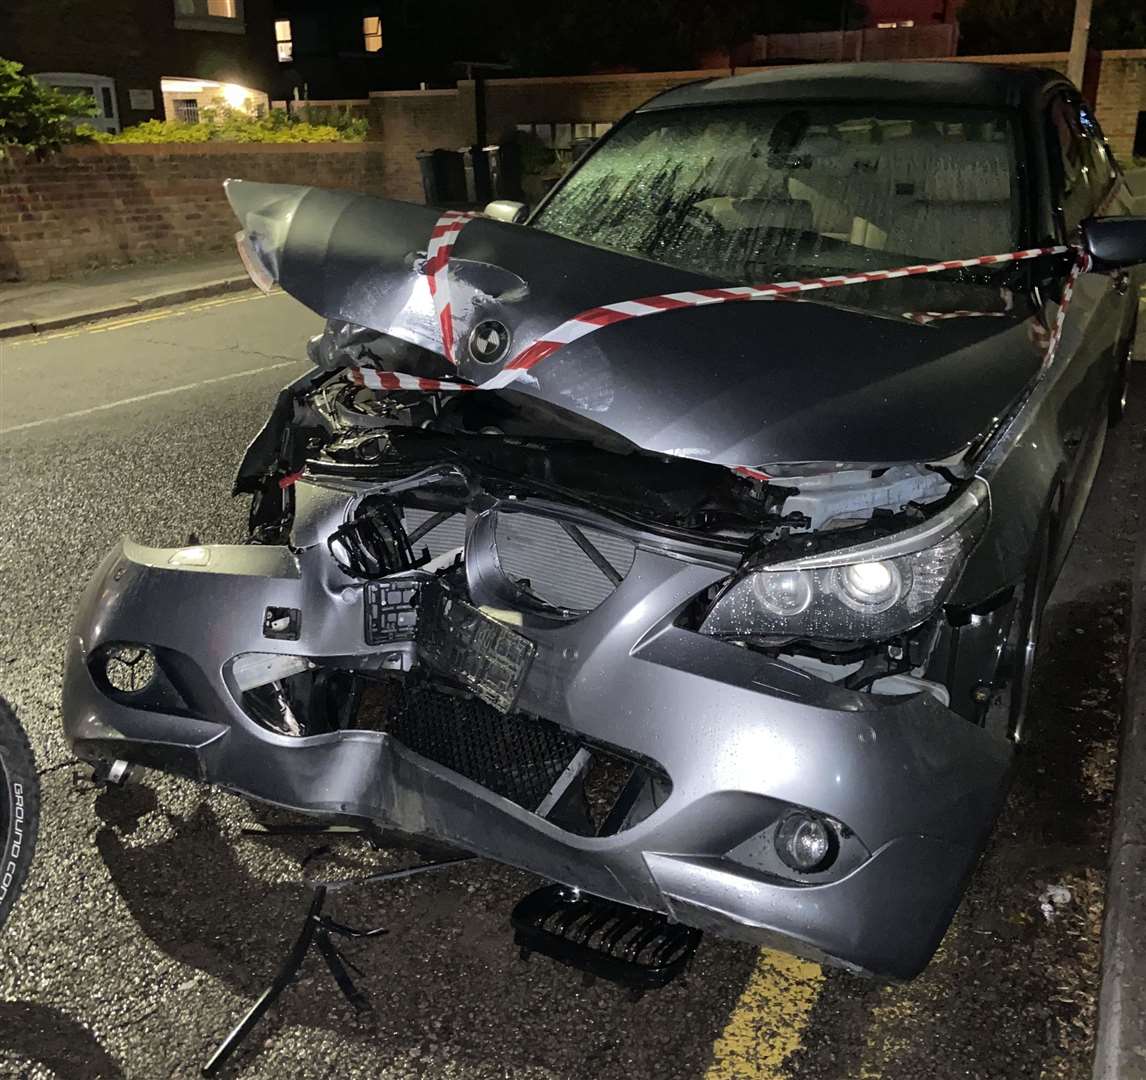 Some of the damage caused by the driver in Wheeler Street, Maidstone. Pic: Jake Iszard